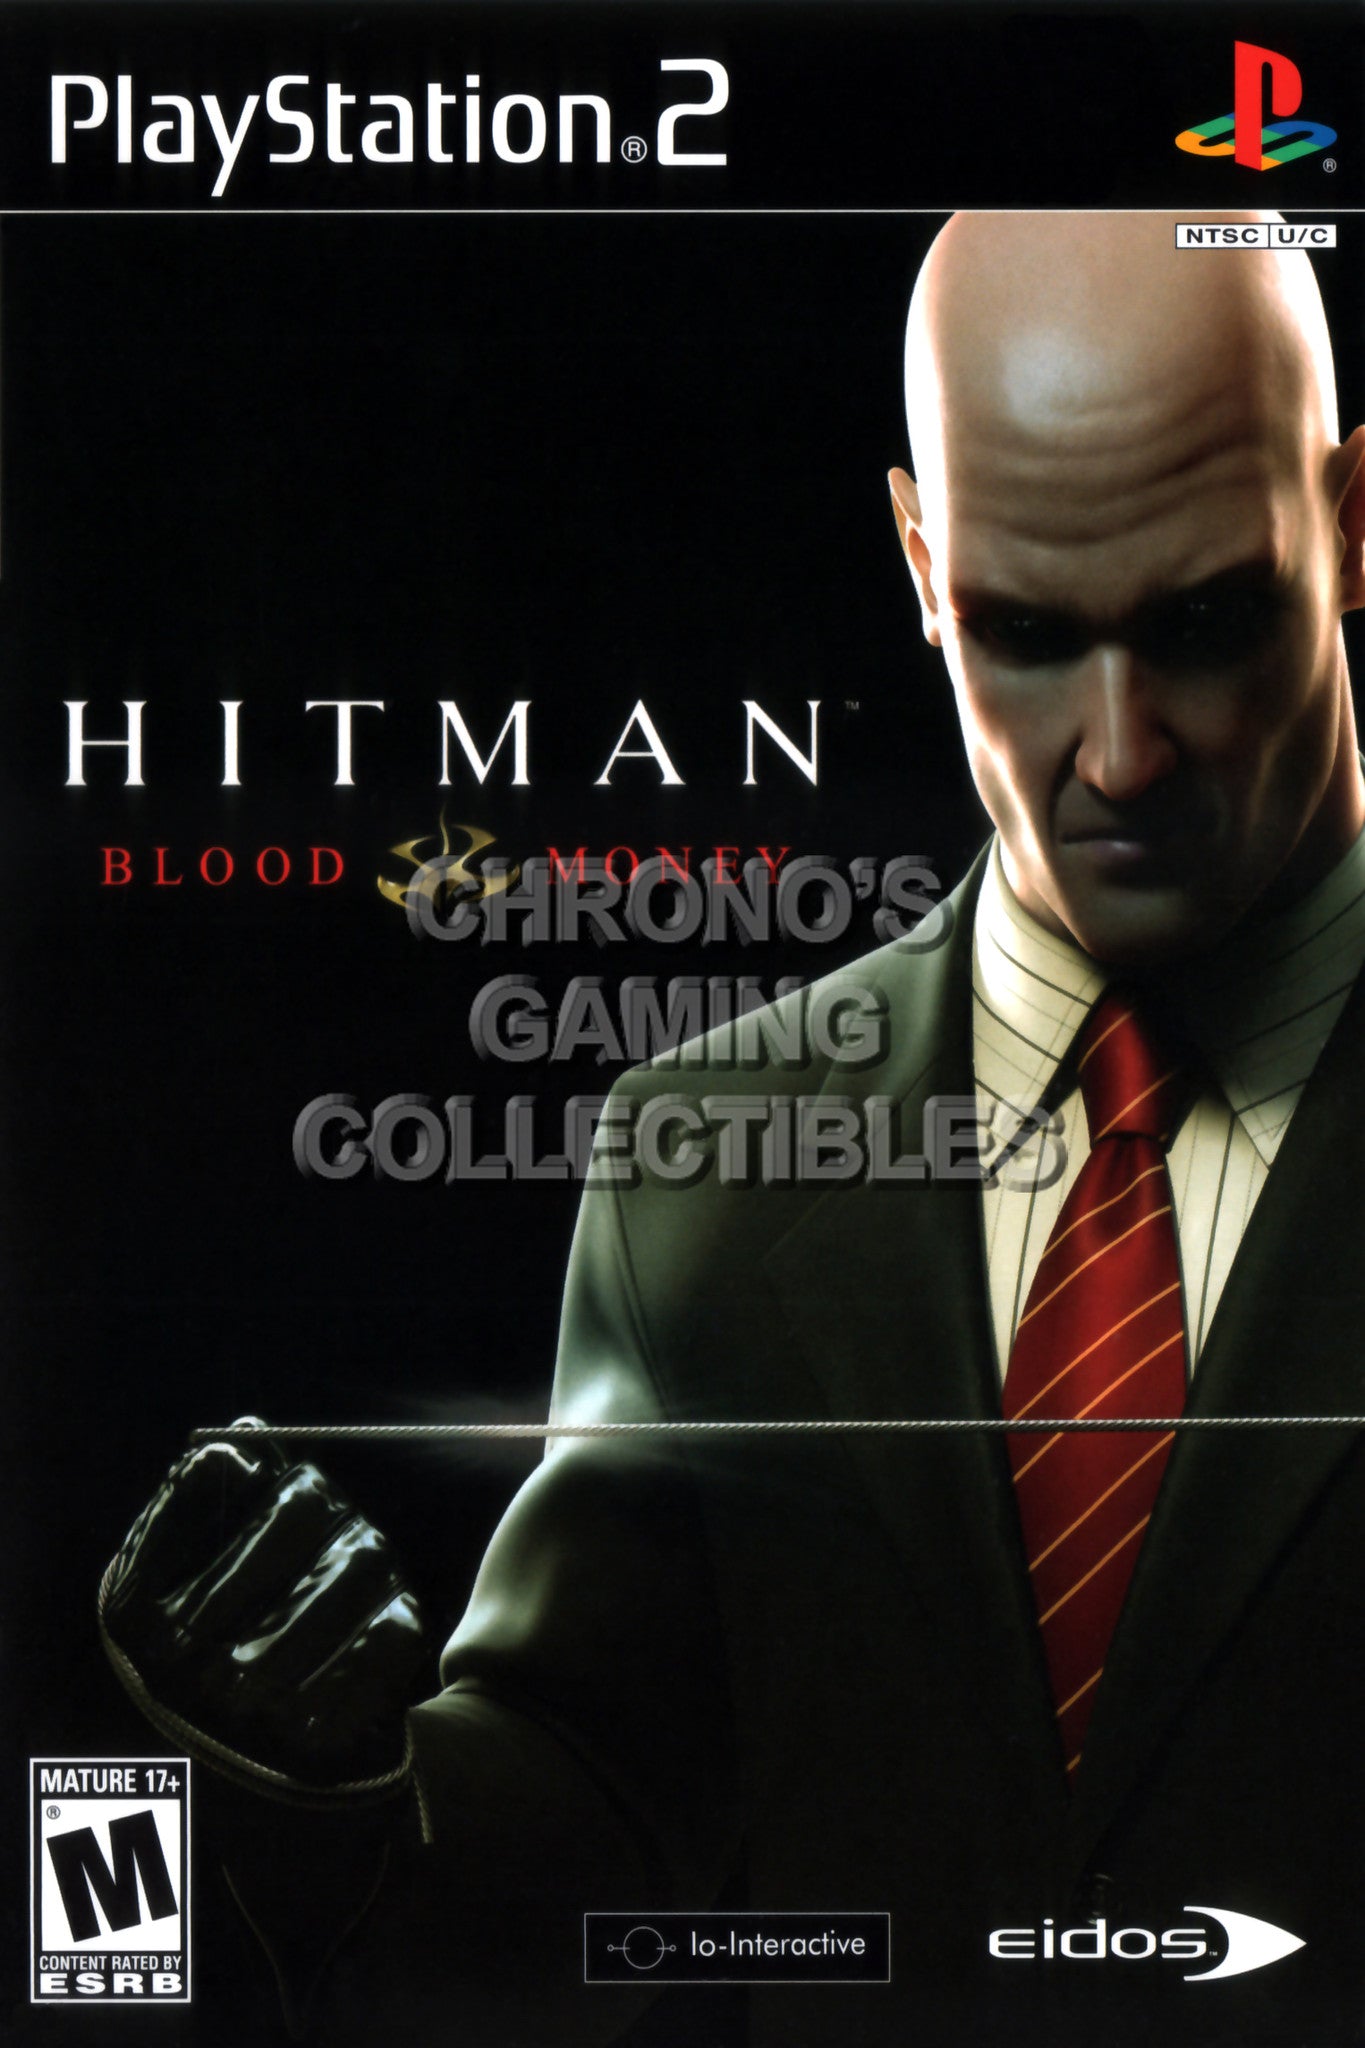 Playstation 2 Video Games Poster Cgcposters - cgc huge poster hitman blood money box art sony plastation 2 ps2 ps2151